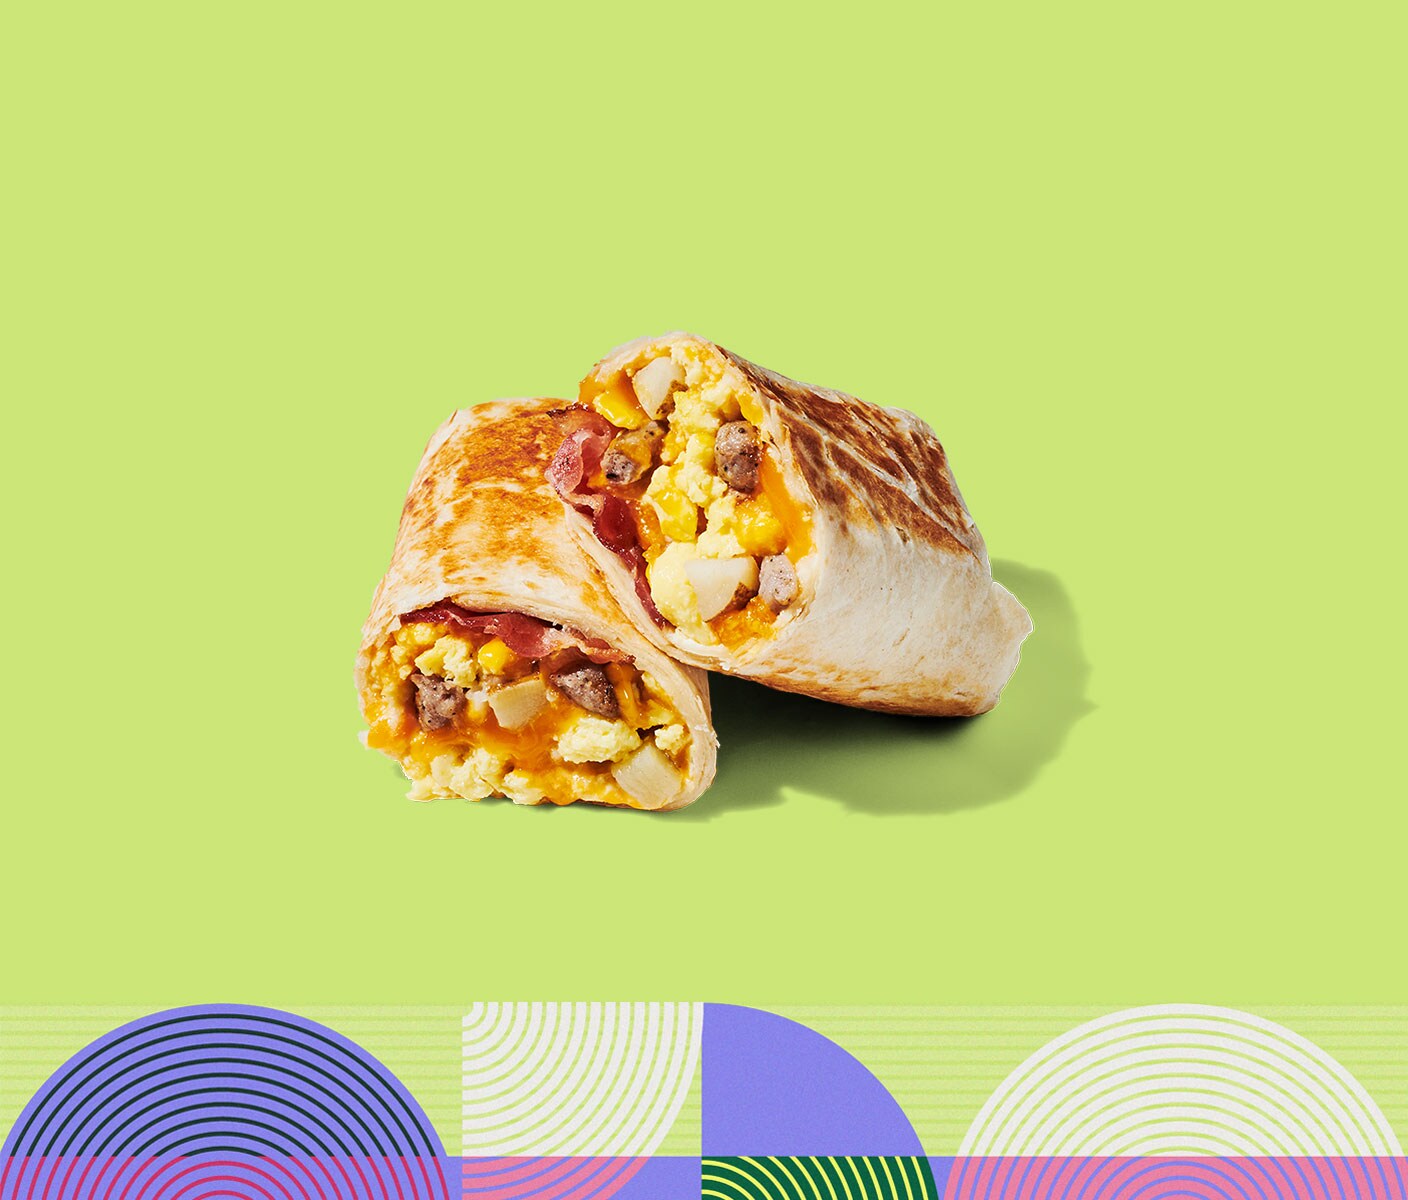 A cooked wrap filled with a combination of breakfast ingredients, cut in half and stacked on itself.